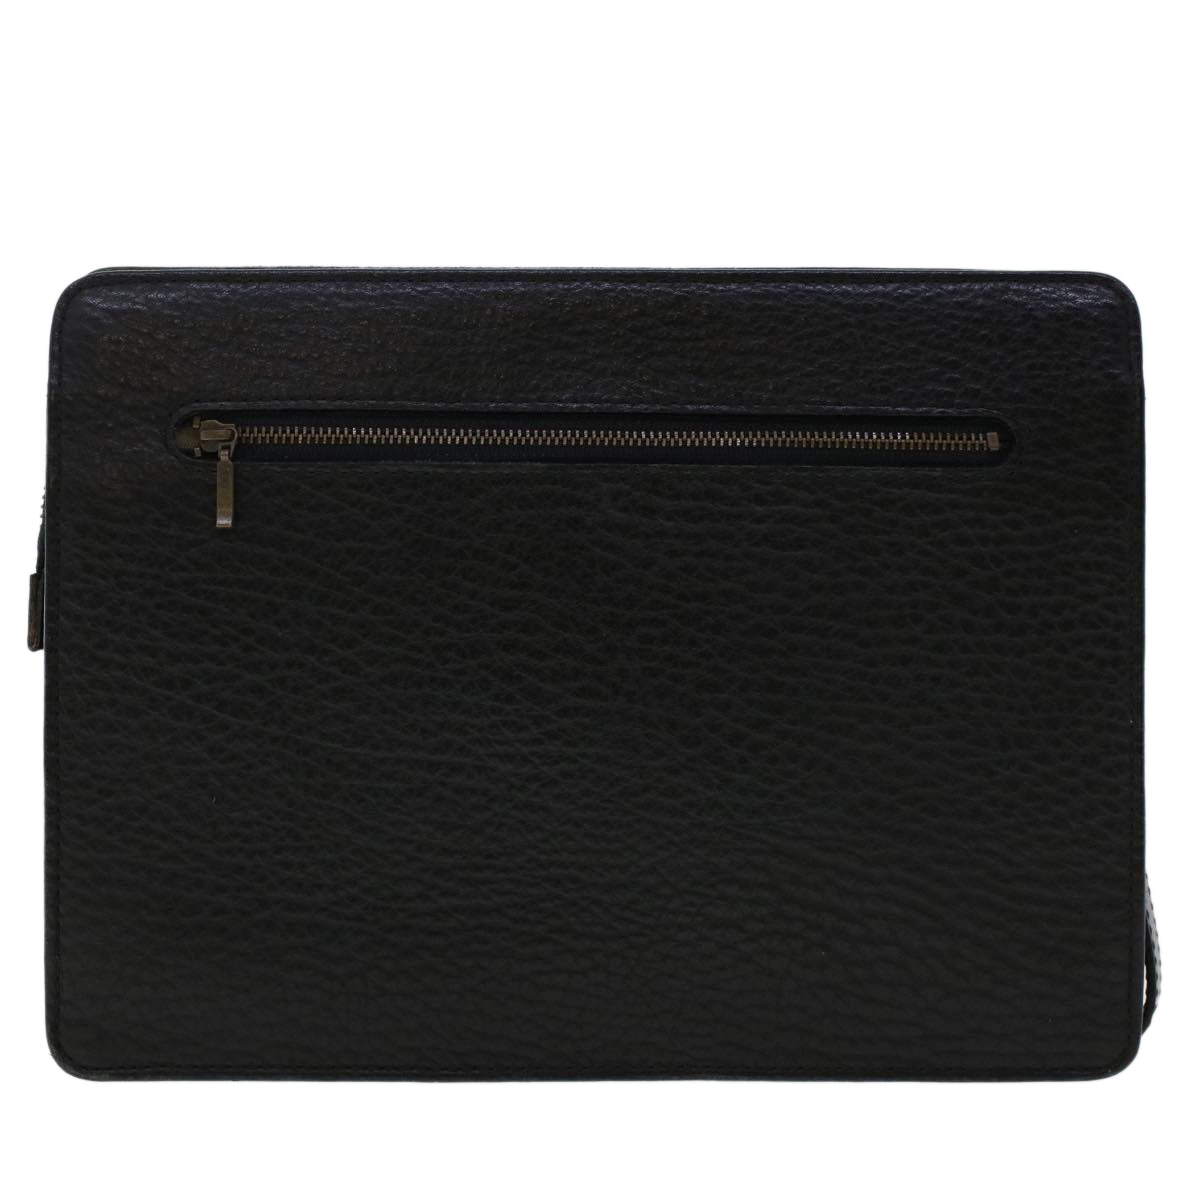 Burberrys Clutch Bag Leather Black Auth ep1119 - 0